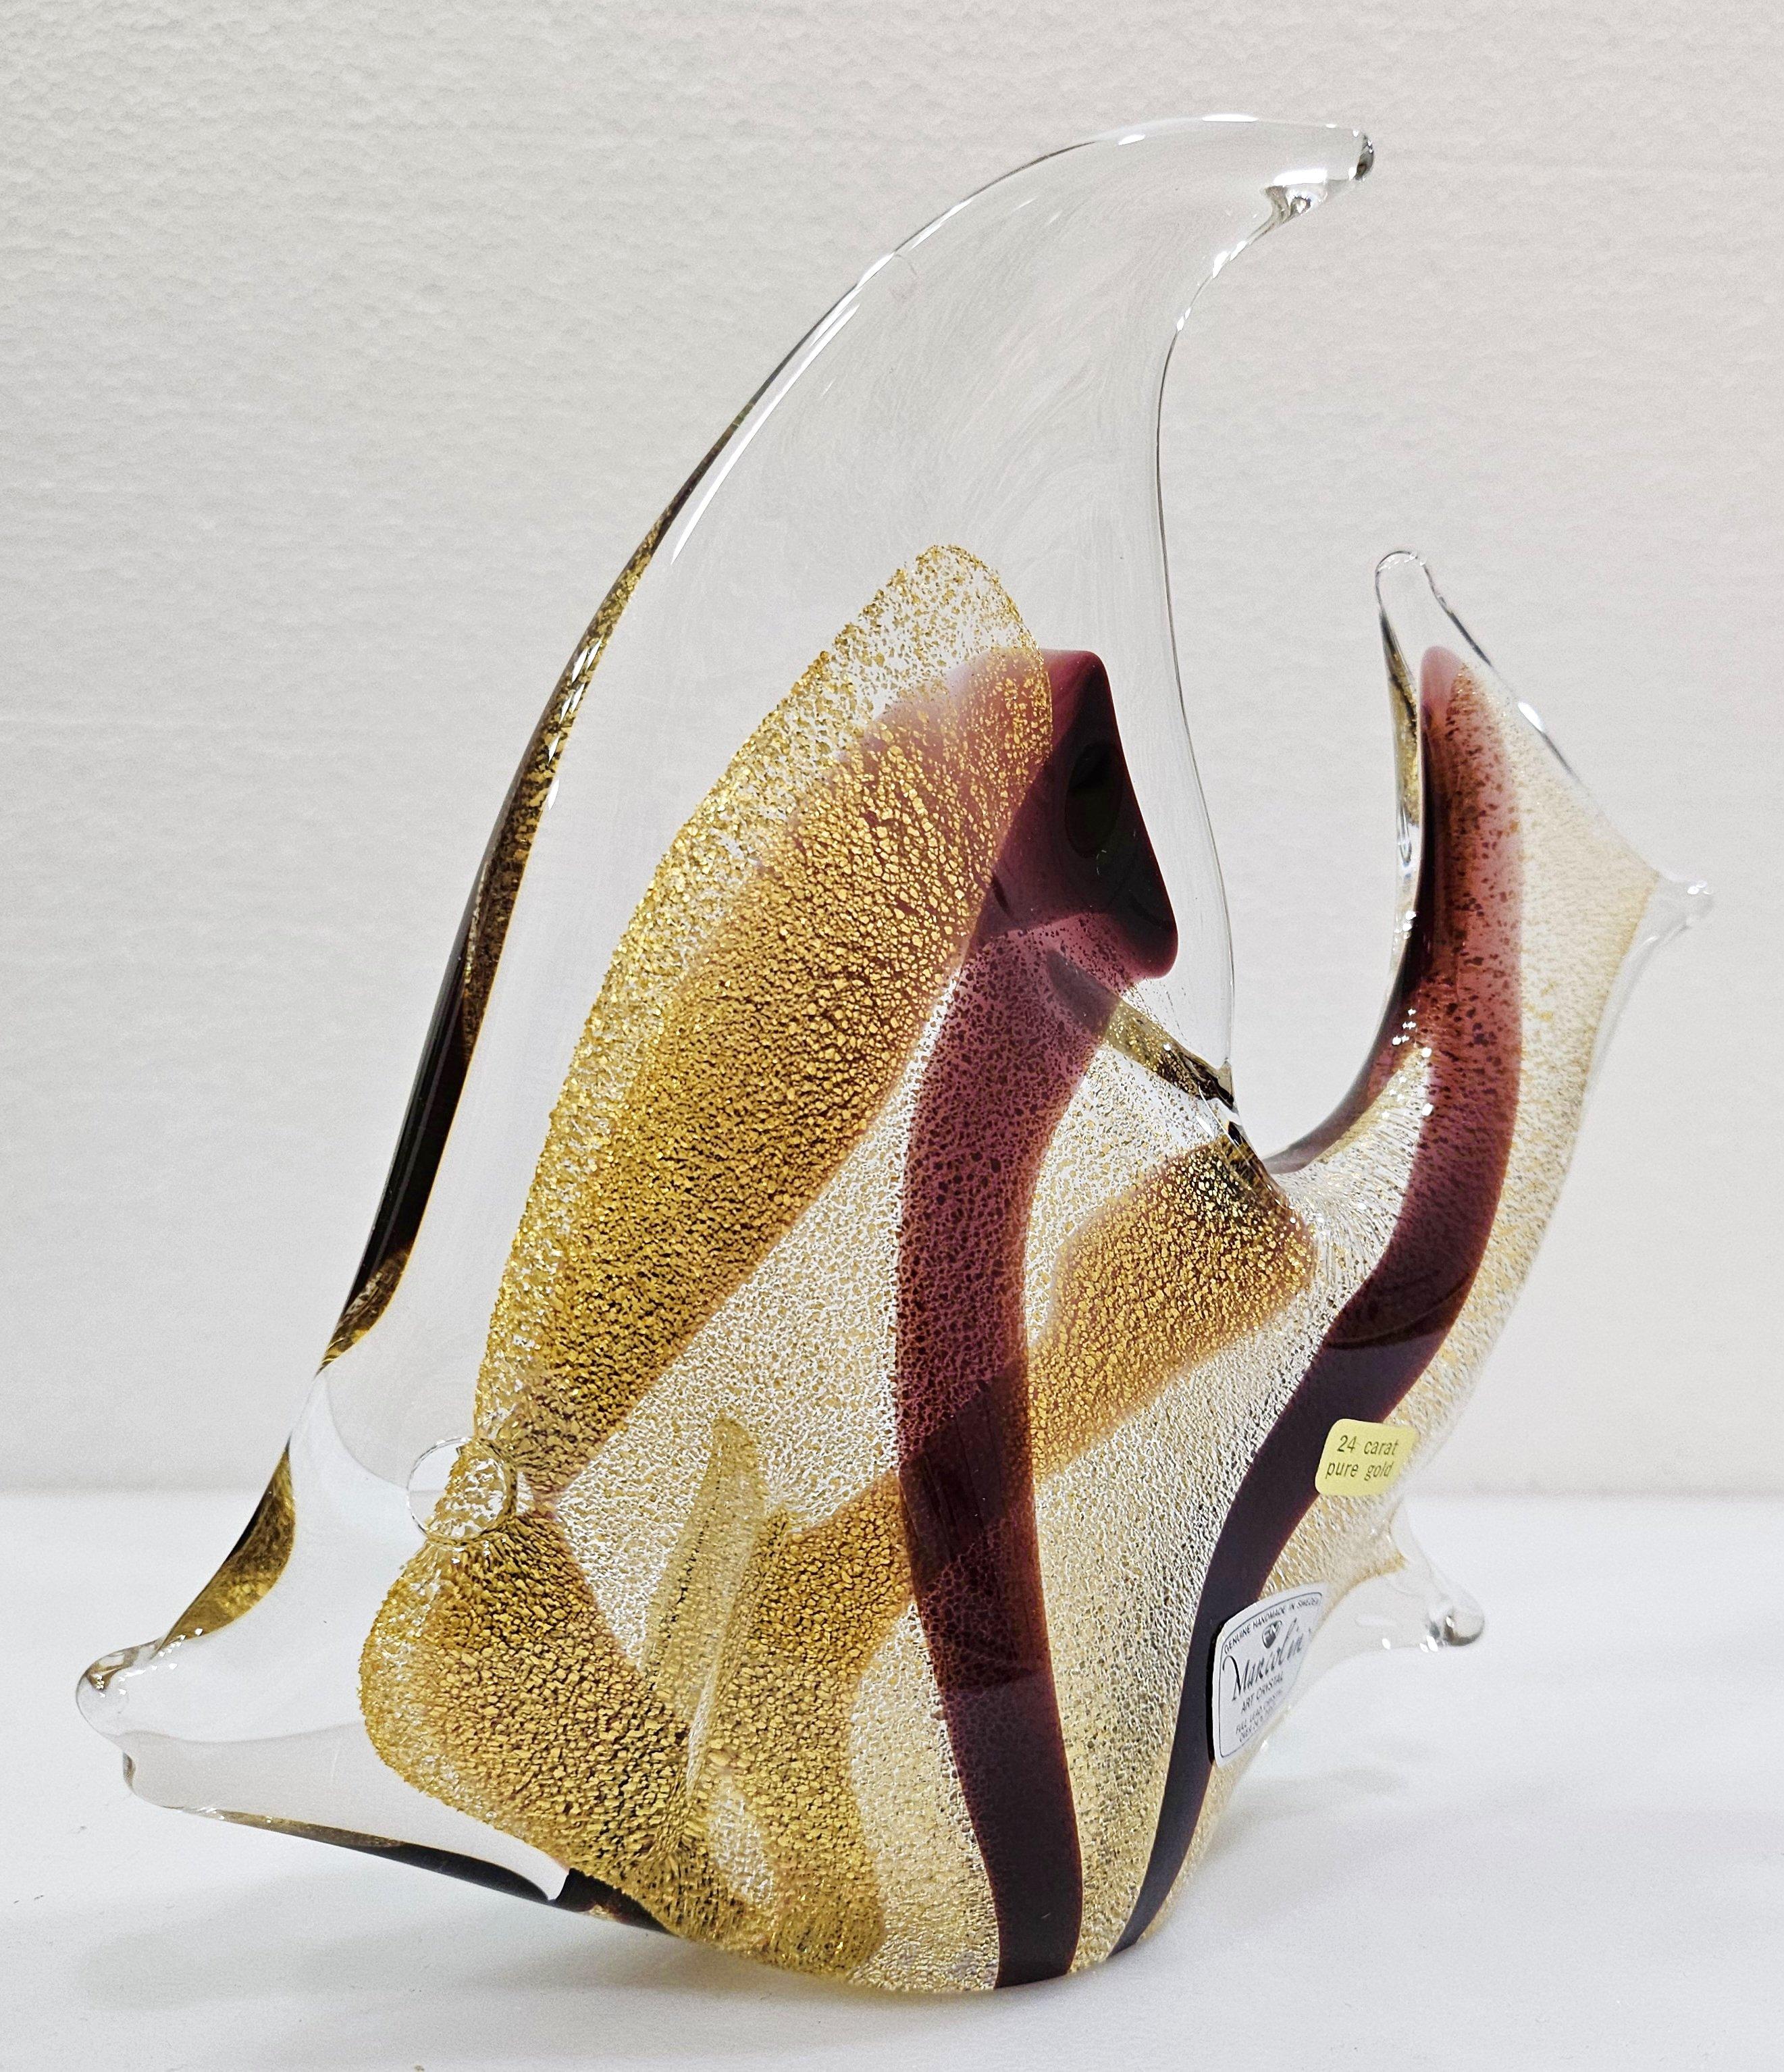 Mid-Century Modern Signed, 24k gold infused, Glass Fish Sculpture by Josef Marcolin. For Sale